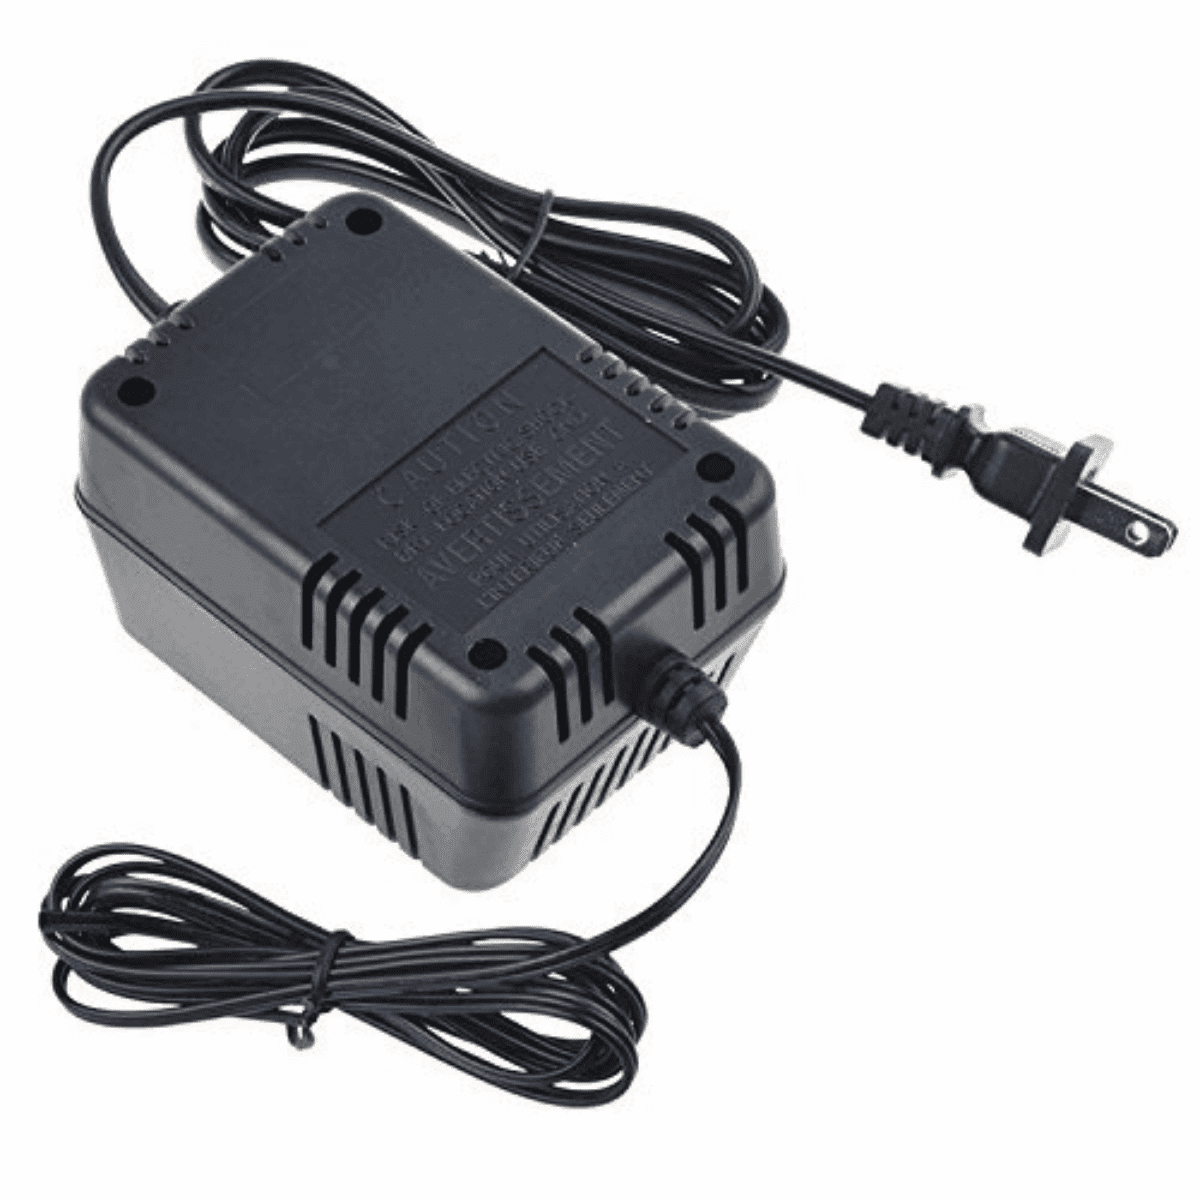 ABLEGRID AC Adapter Wall Power Charger For Cricut Explore Air 2 and ALL  Cricut Cutting Machines Personal Expression Create Power Supply Cord